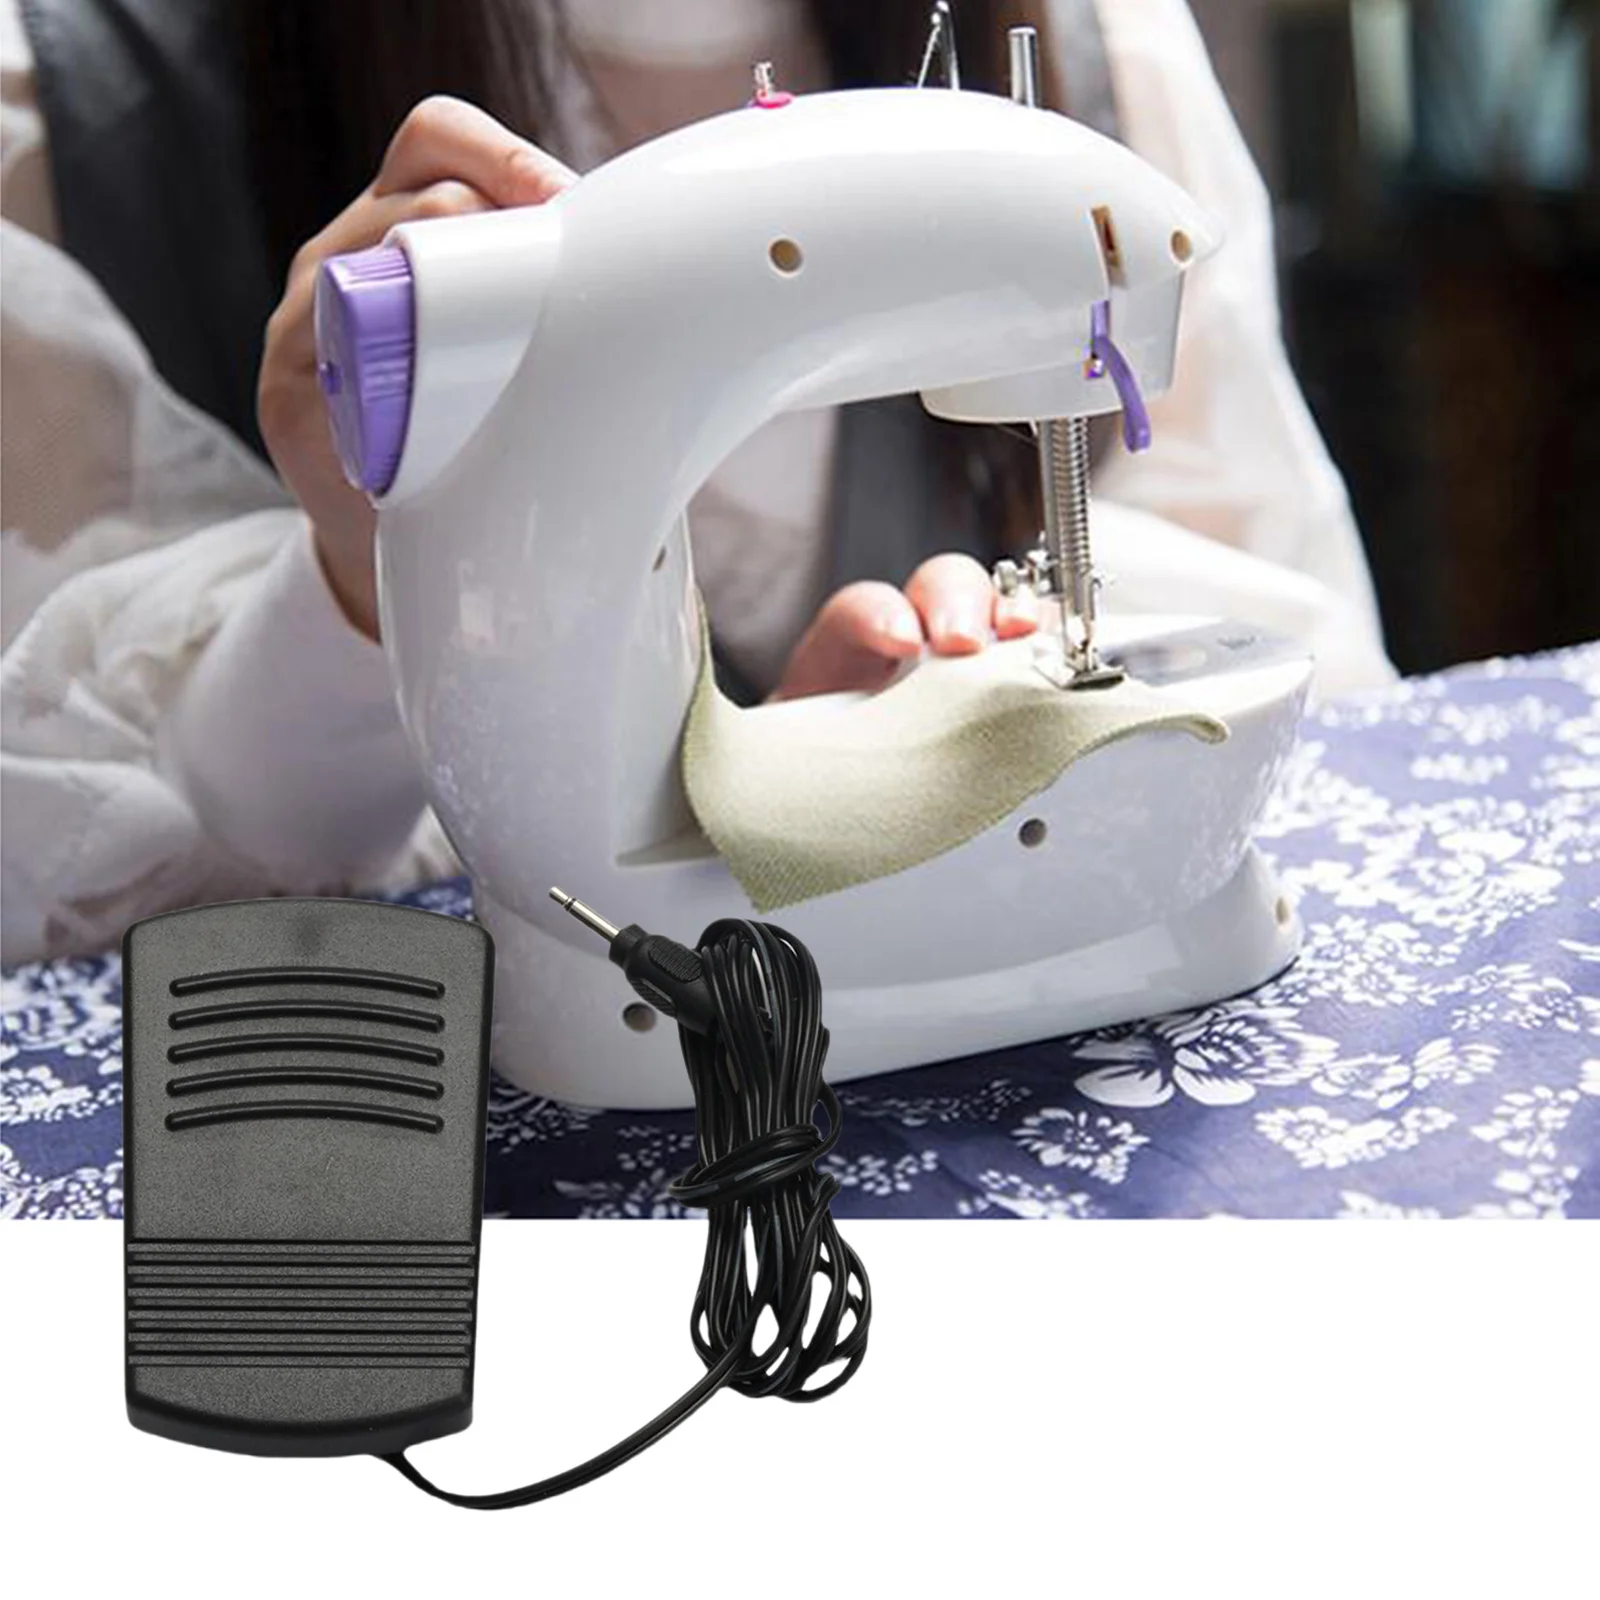 Sewing Machine Pedal Foot Control Pedal Household Sewing Machine Sewing Machine Foot Control Pedal With Cord